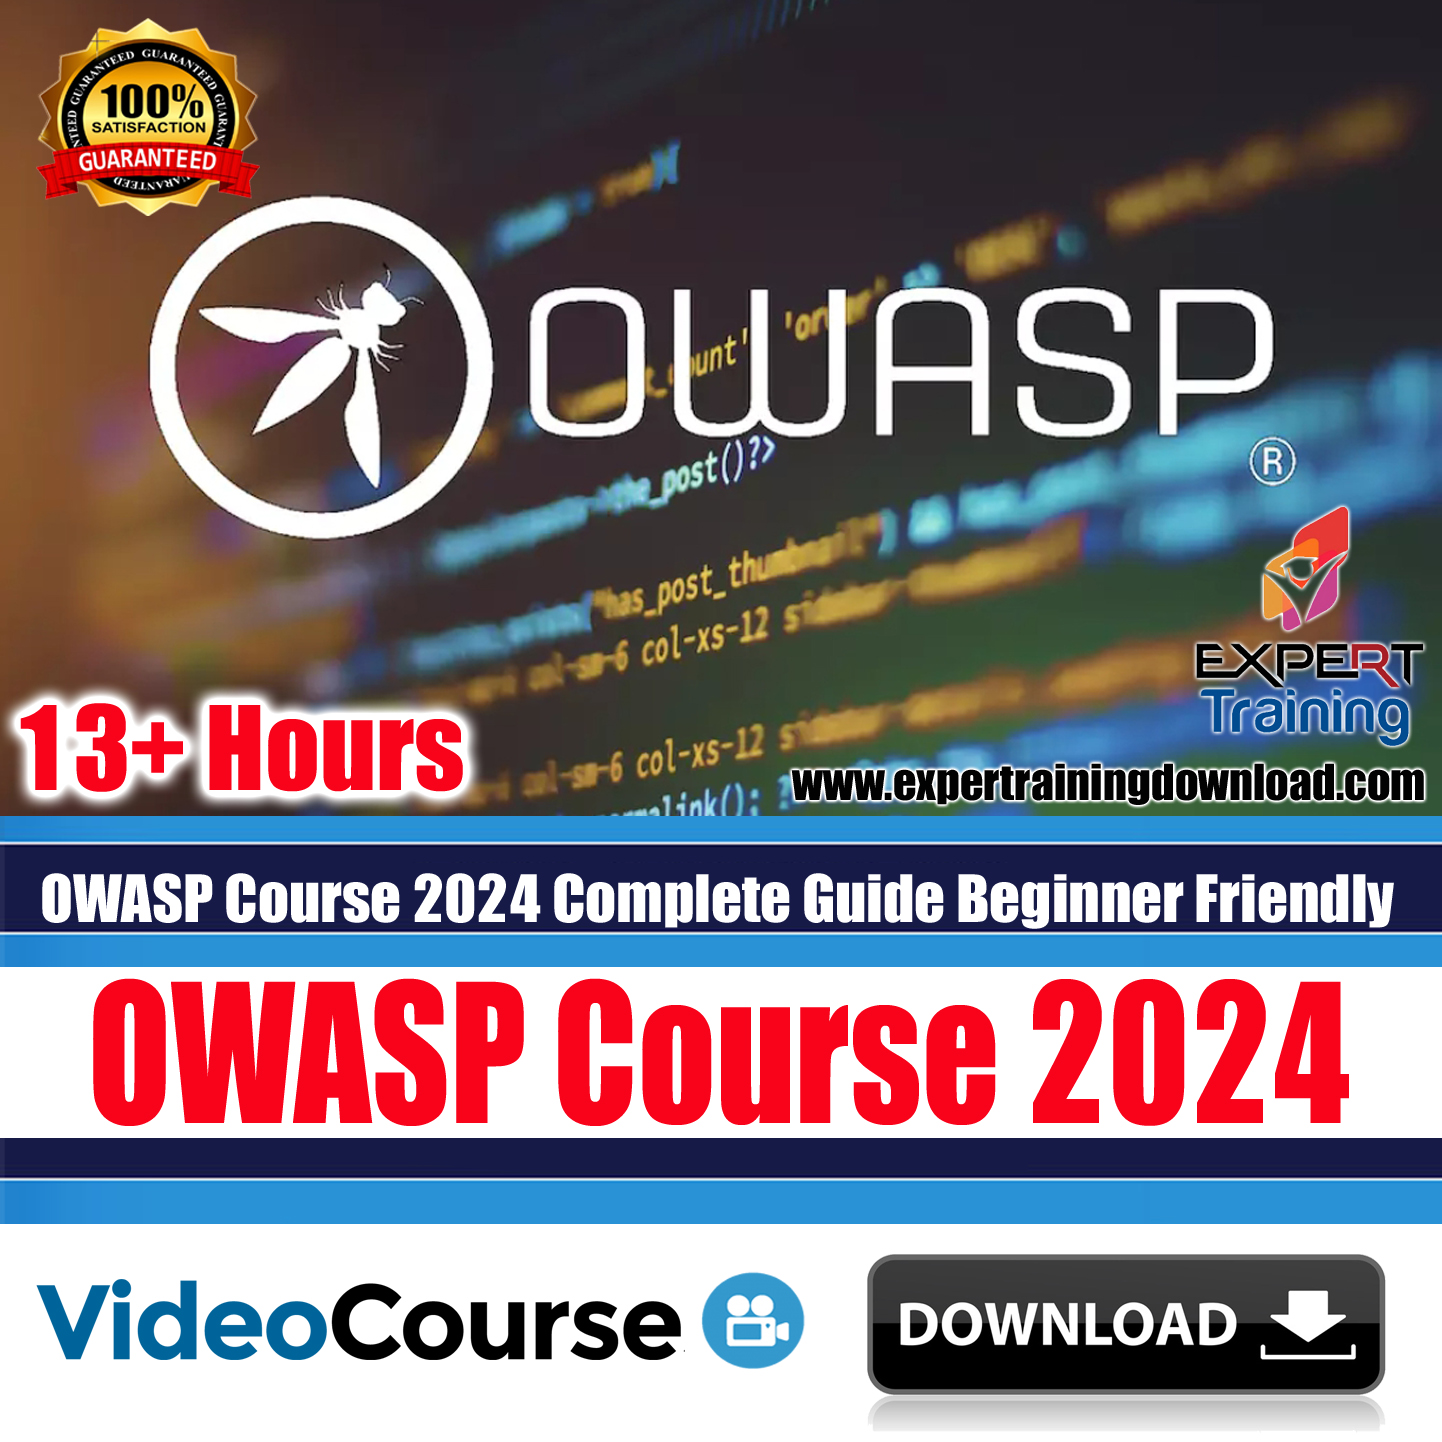 OWASP Course 2024 Complete Guide Beginner Friendly